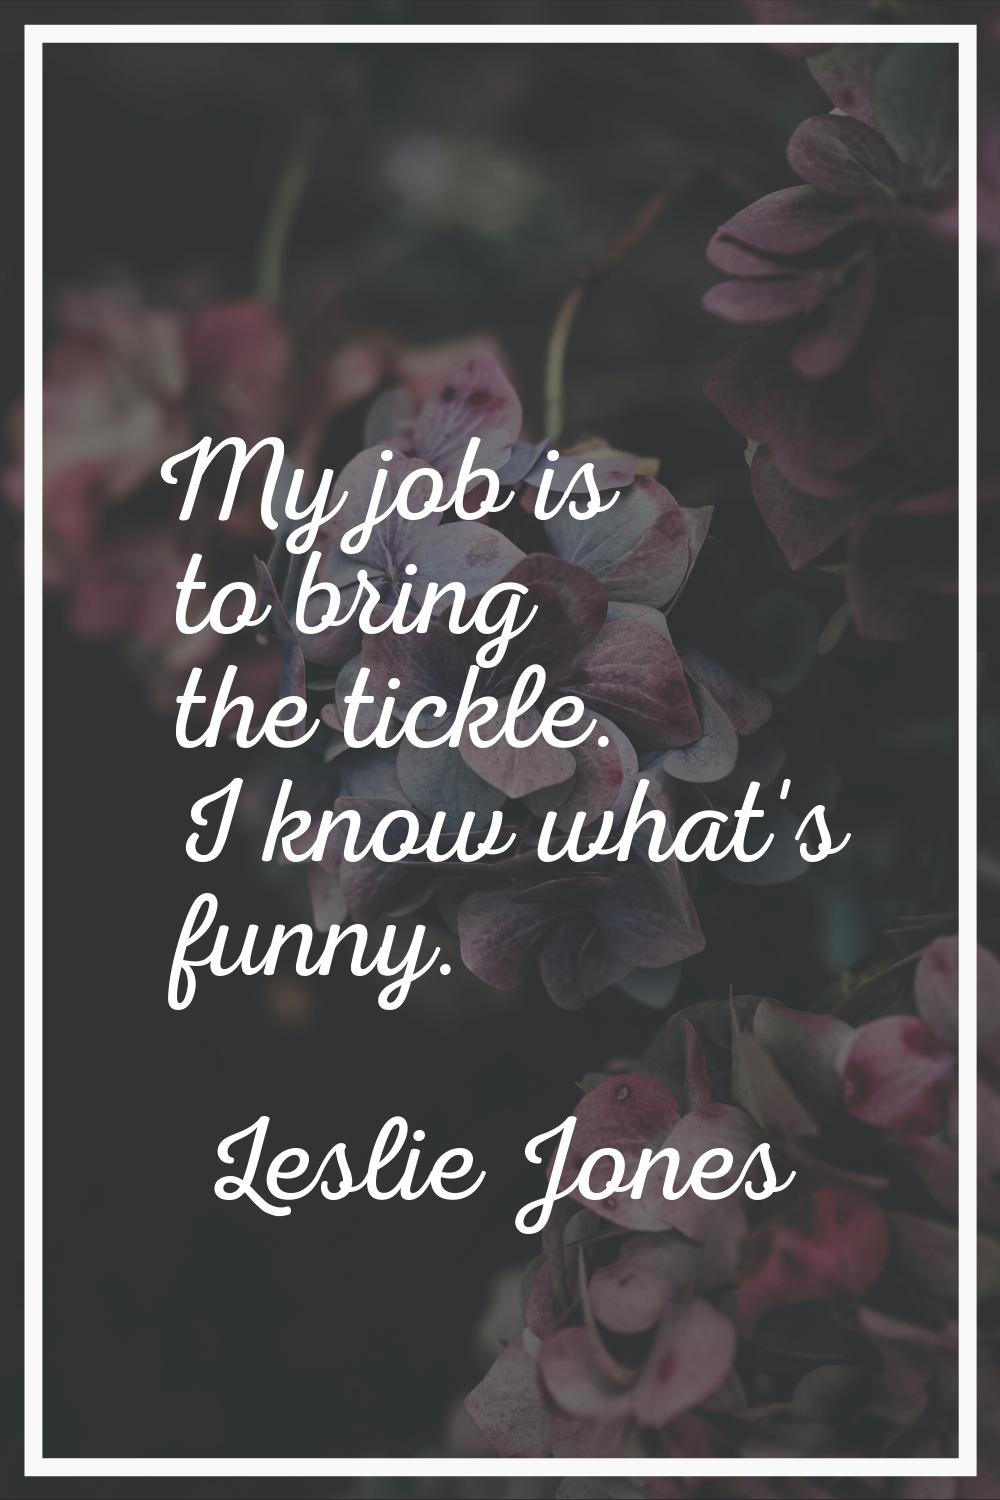 My job is to bring the tickle. I know what's funny.